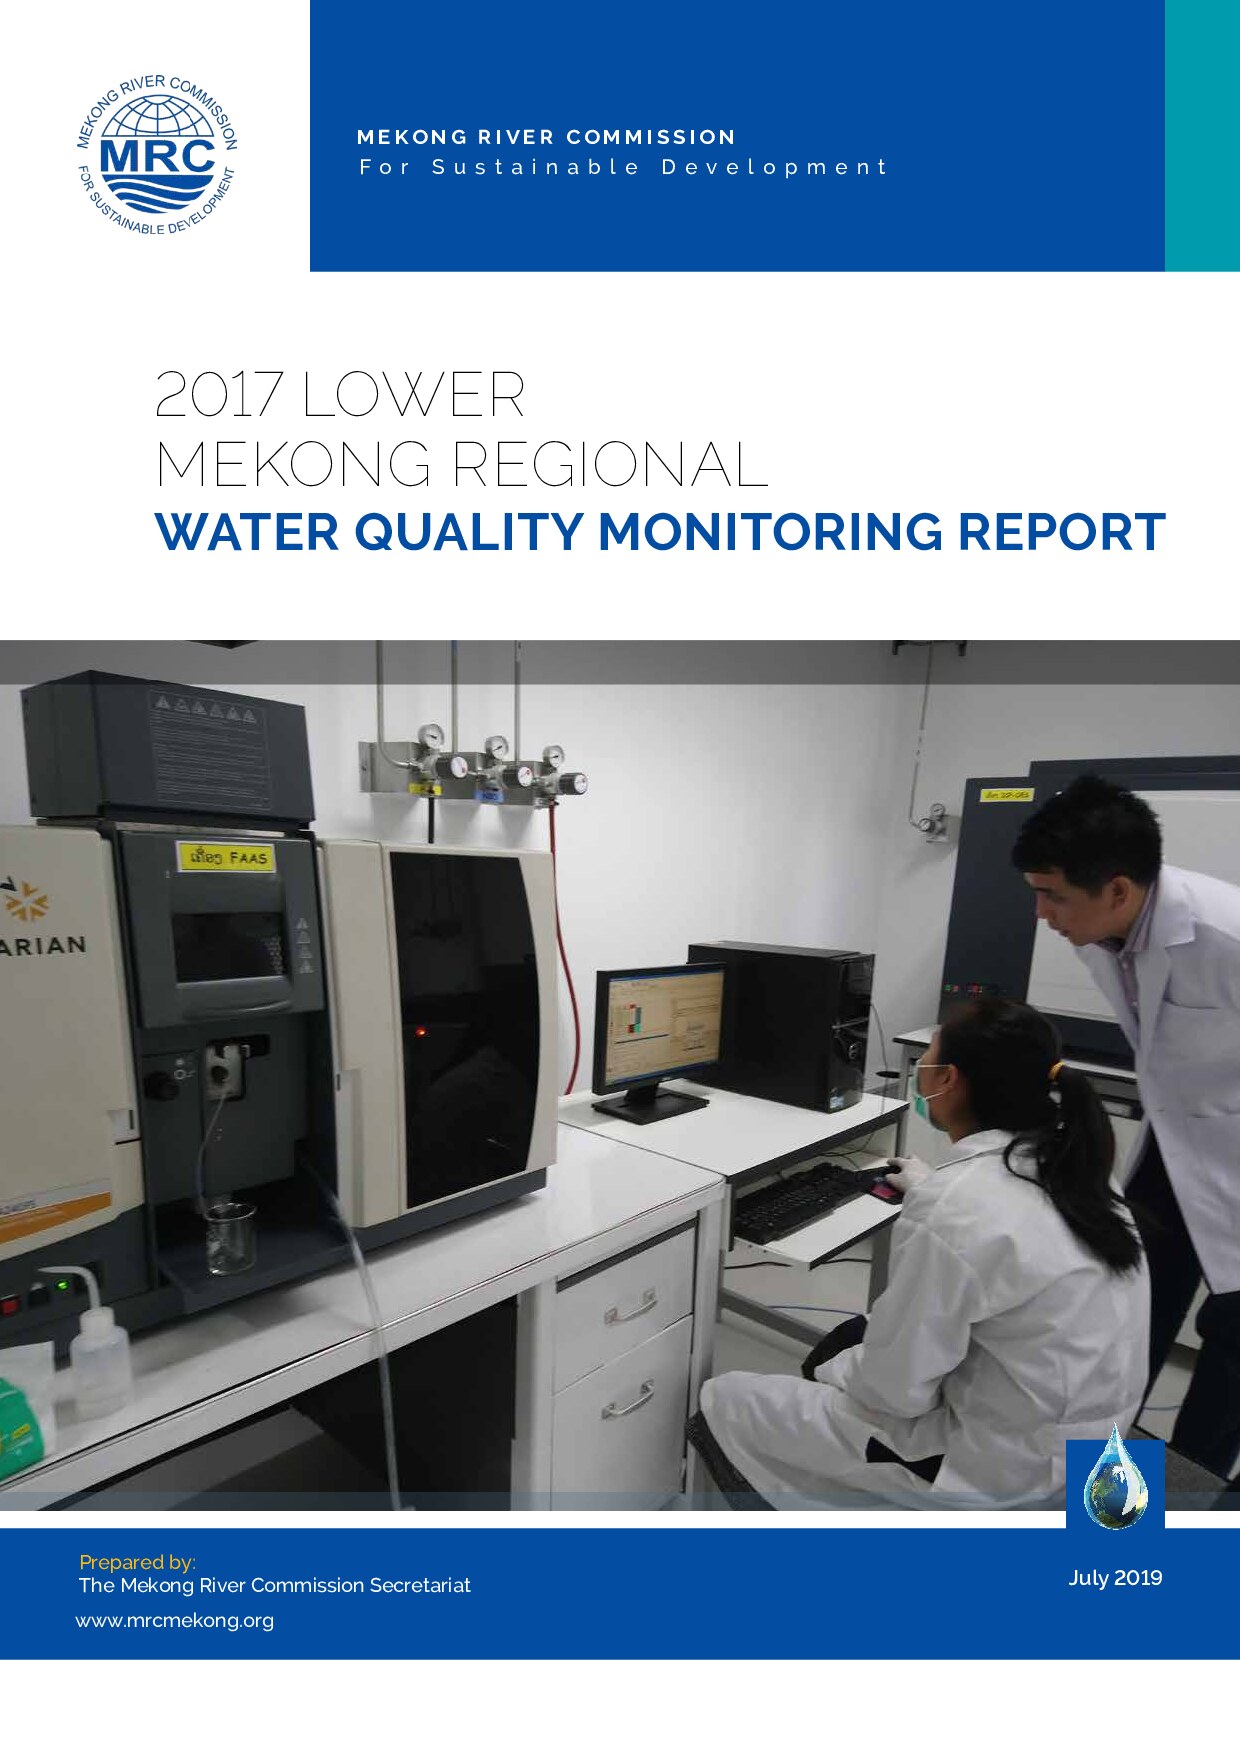 2017-Lower-Mekong-Regional-Water-Quality-Monitoring-Report-7July19